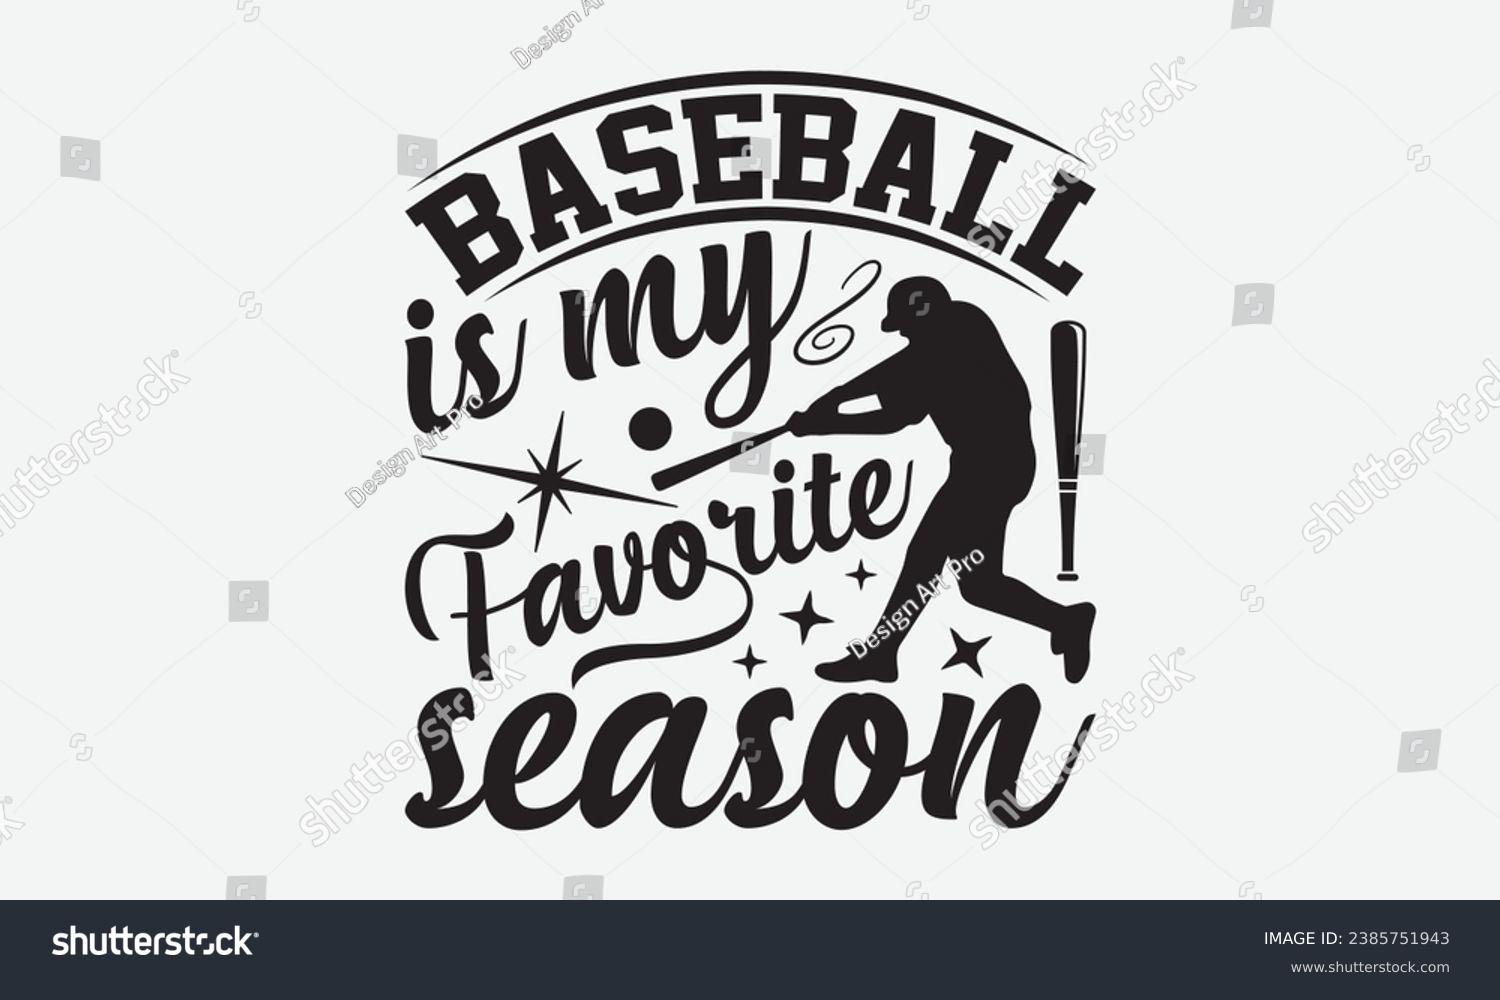 SVG of Baseball Is My Favorite Season -Baseball T-Shirt Design, Vintage Calligraphy Design, With Notebooks, Pillows, Stickers, Mugs And Others Print. svg